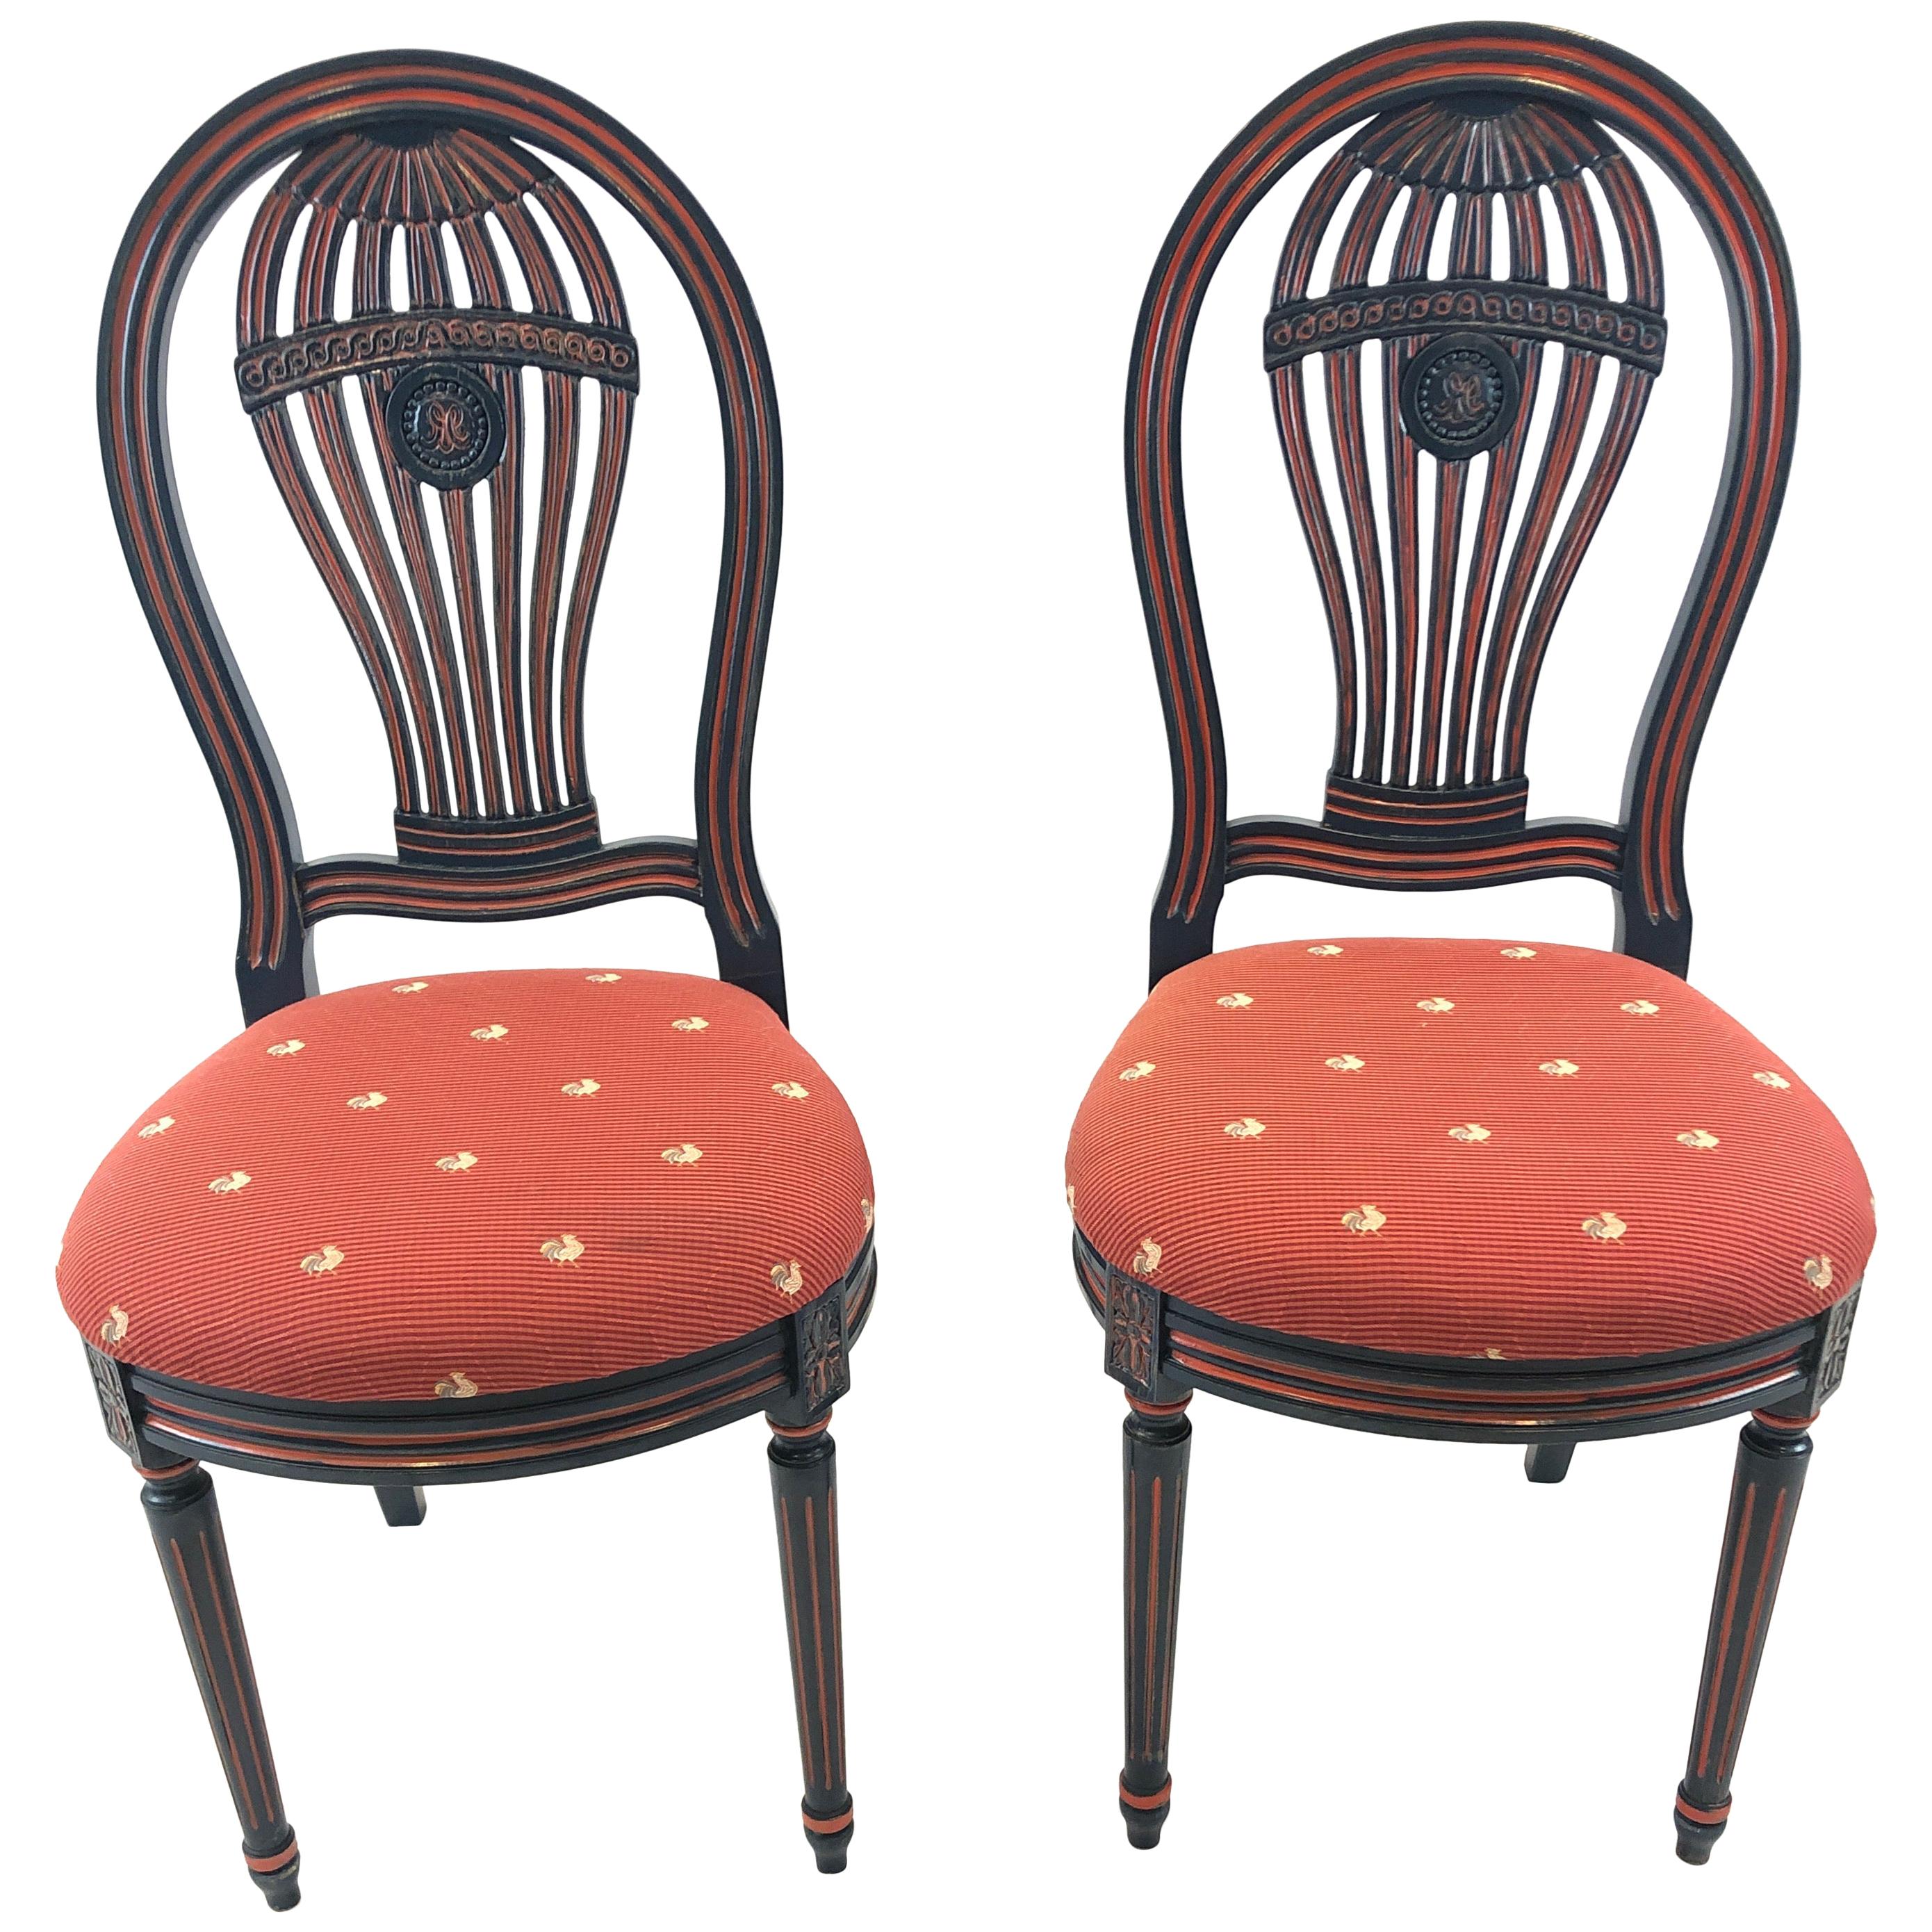 Charming Pair of French Balloon Back Carved Wood and Painted Side Chairs